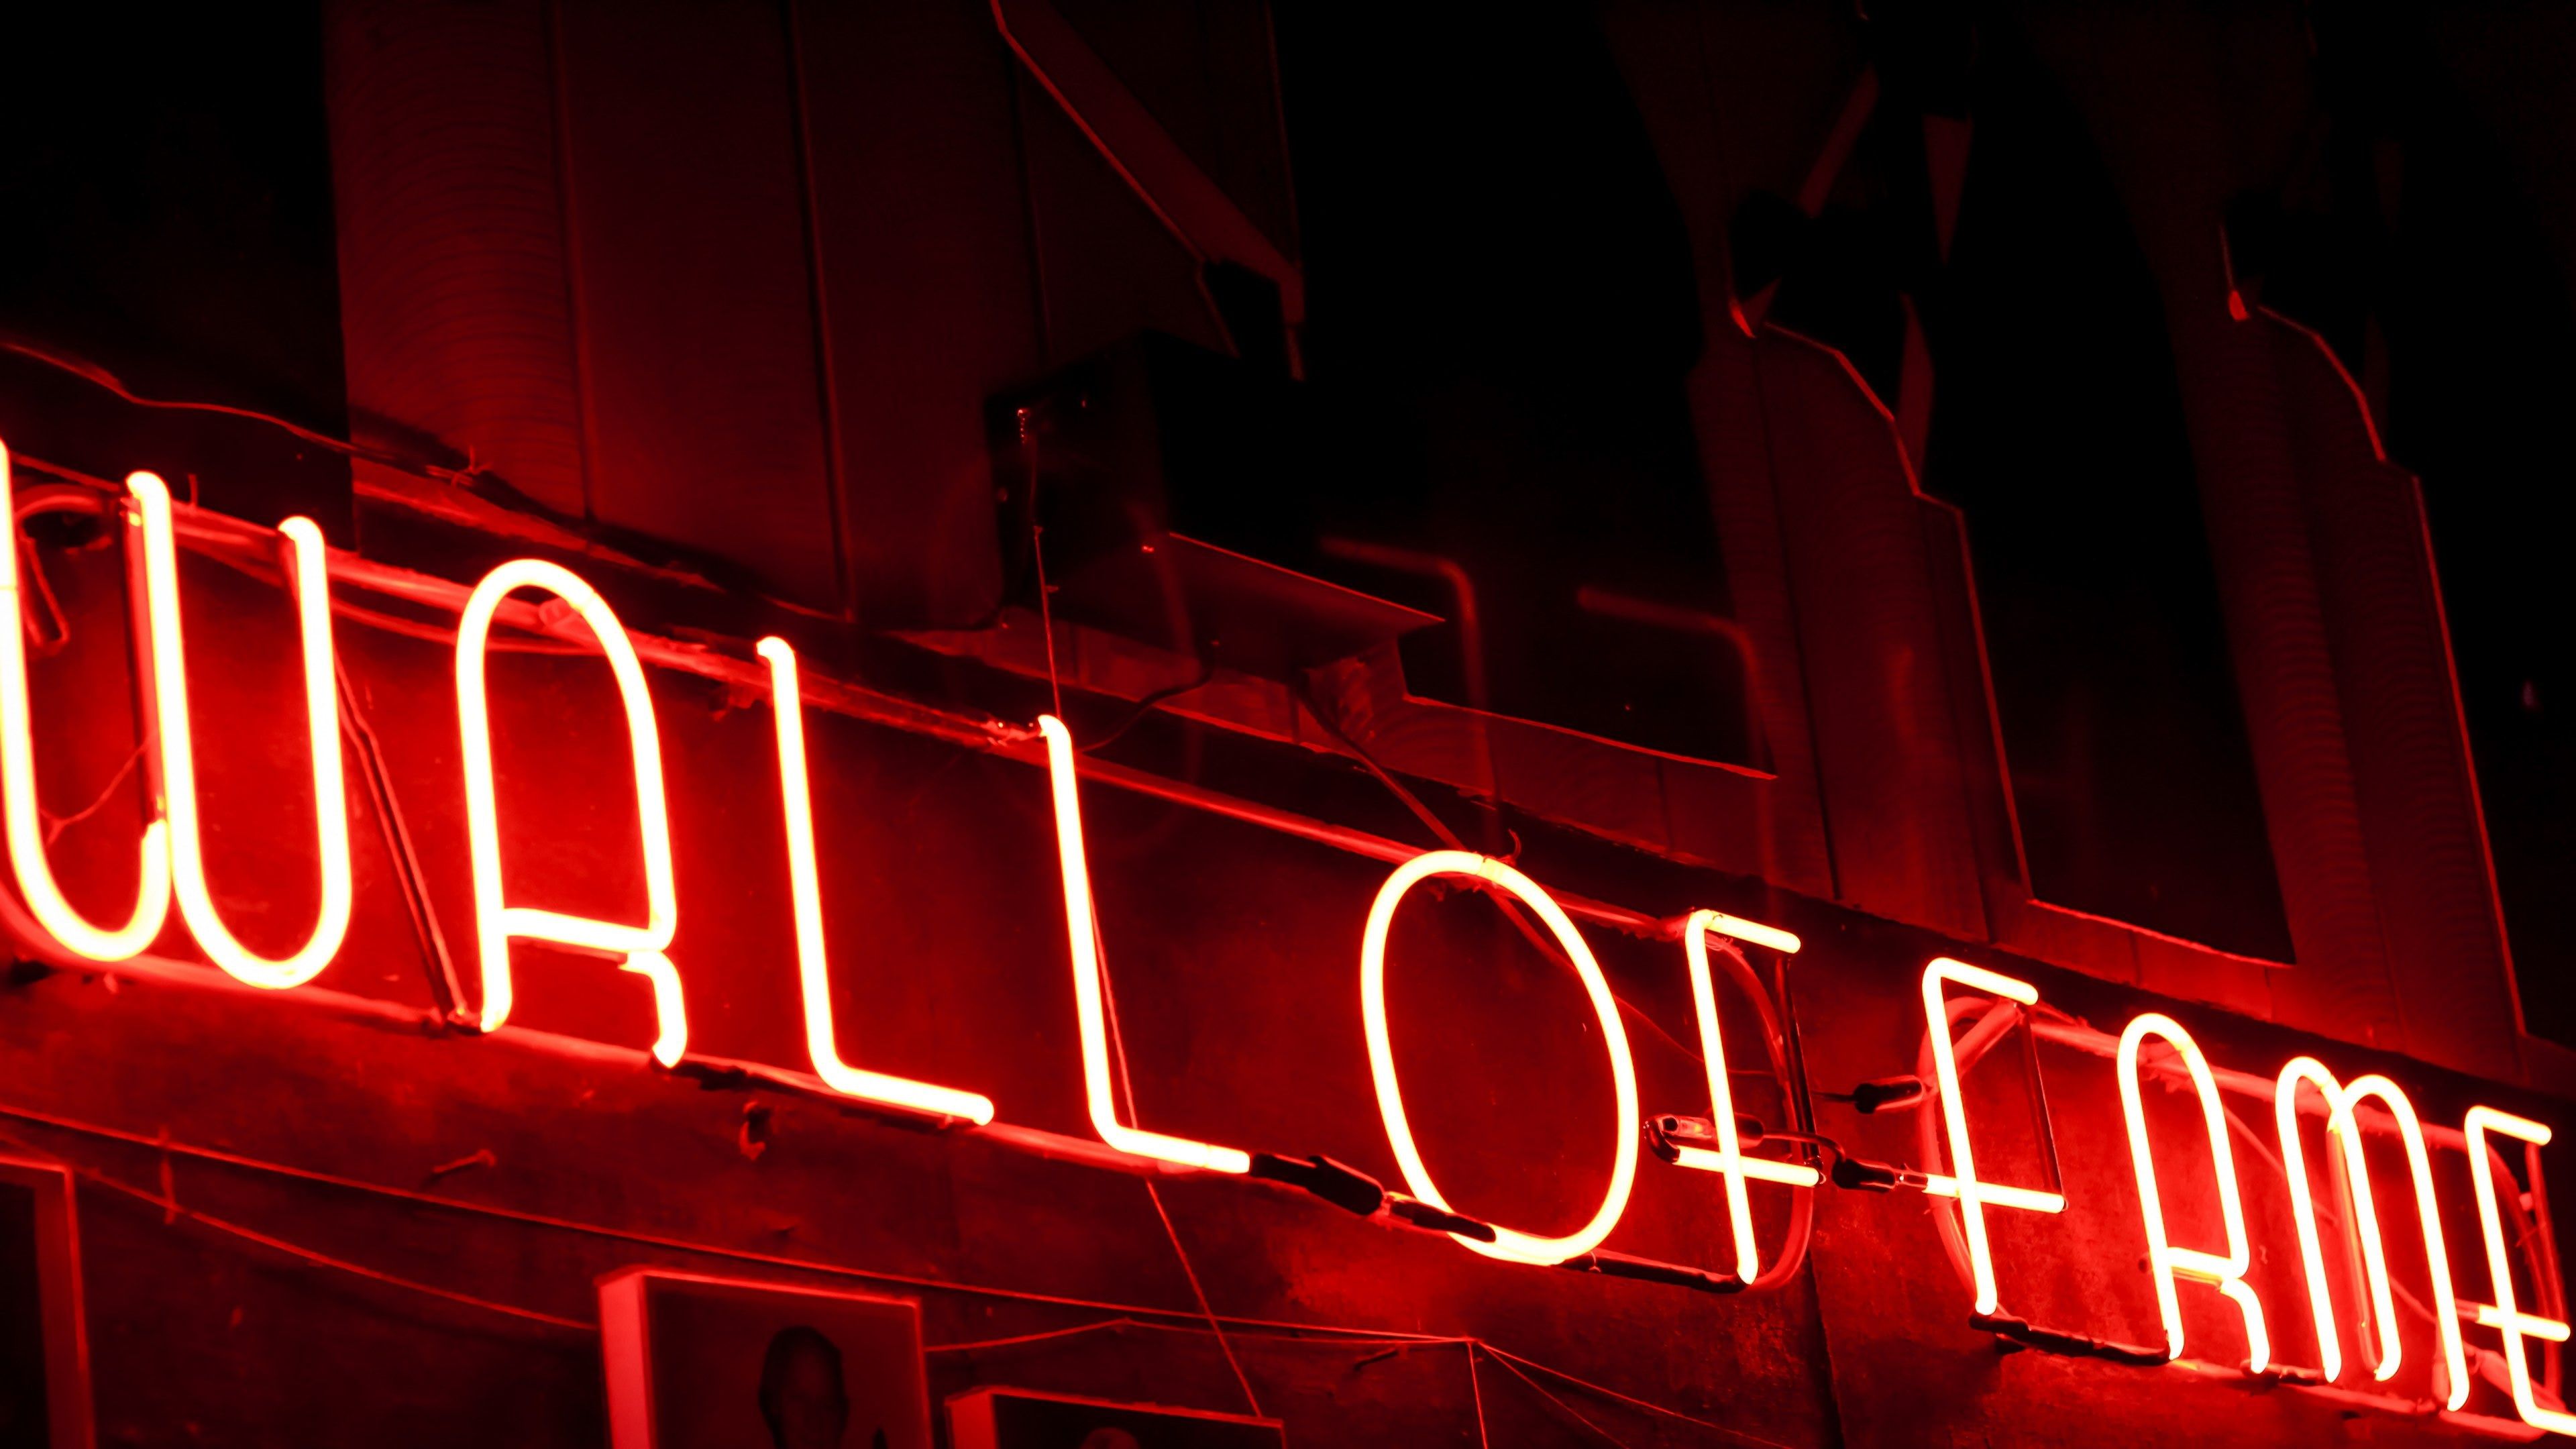 A red neon sign that says Wall of Fame. - Neon red